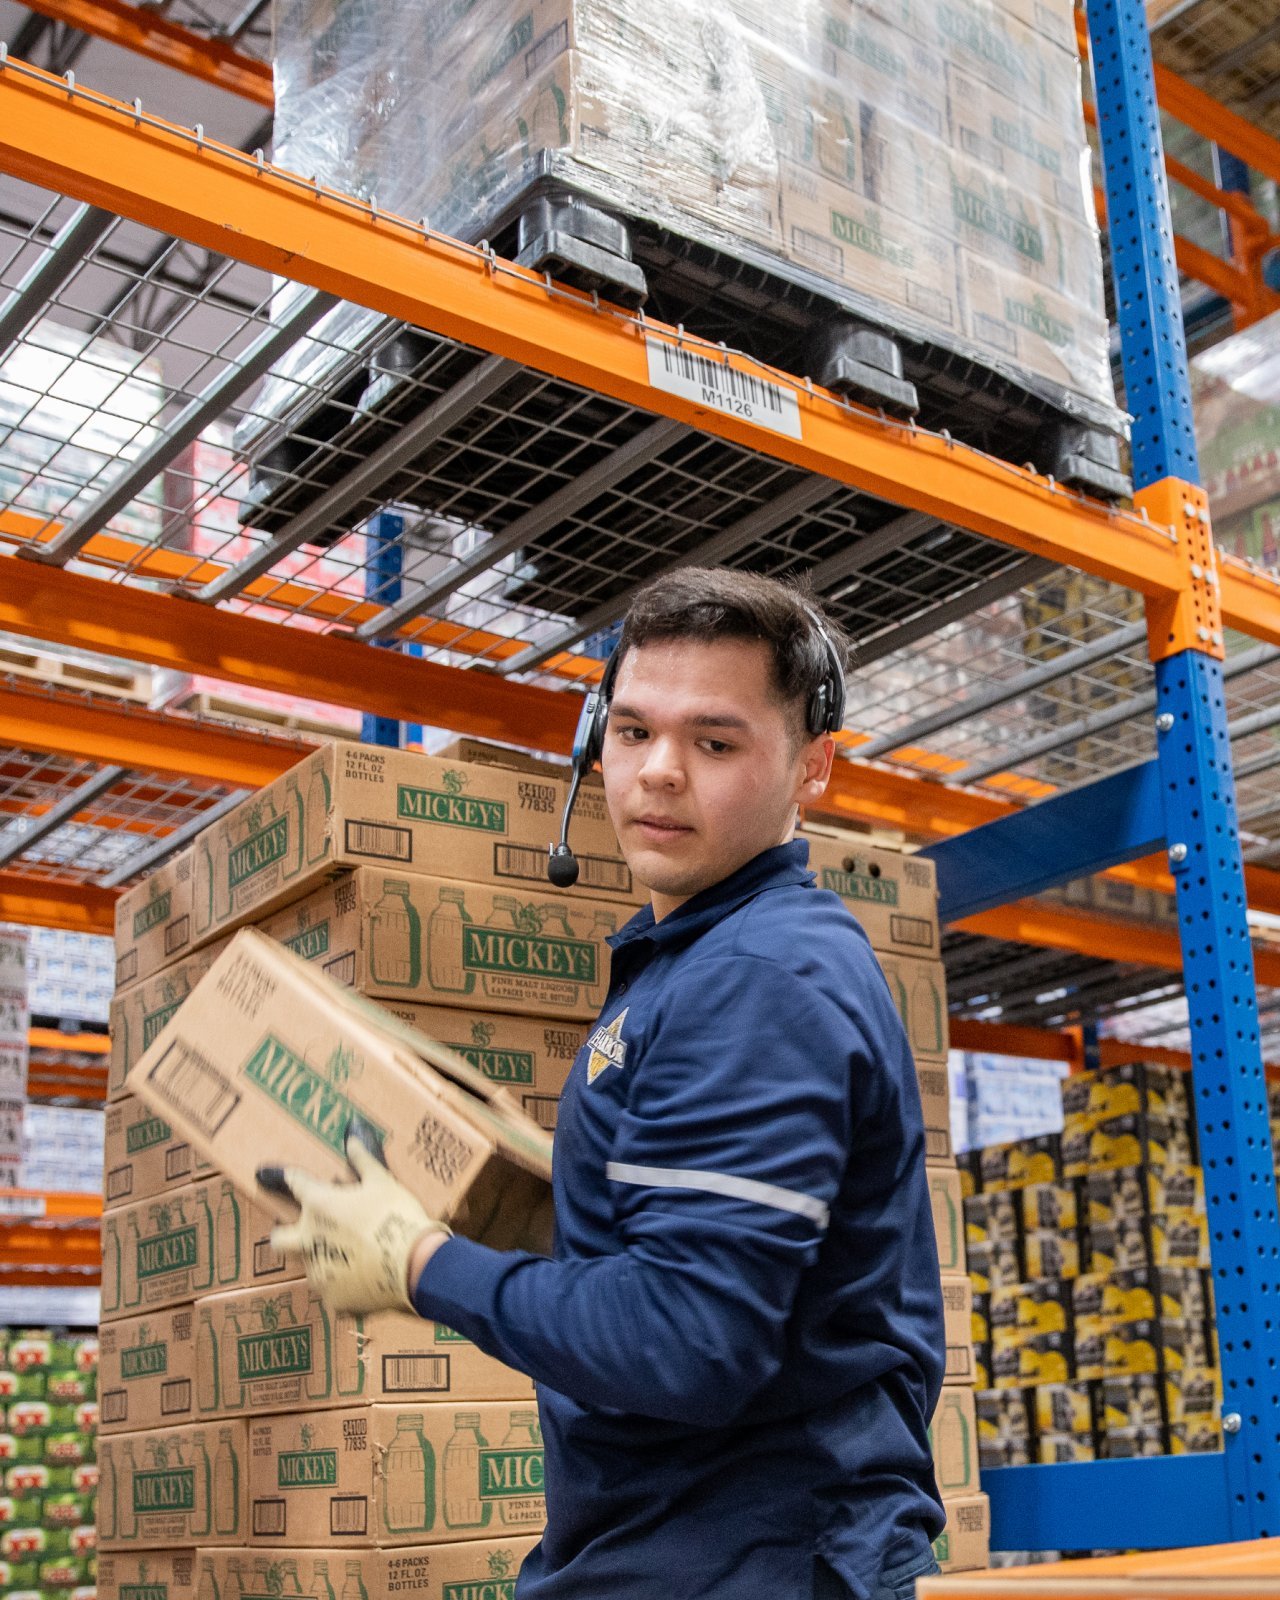 A man wearing a headset, a navy long sleeve shirt and yellow gloves lifting boxes in a warehouse